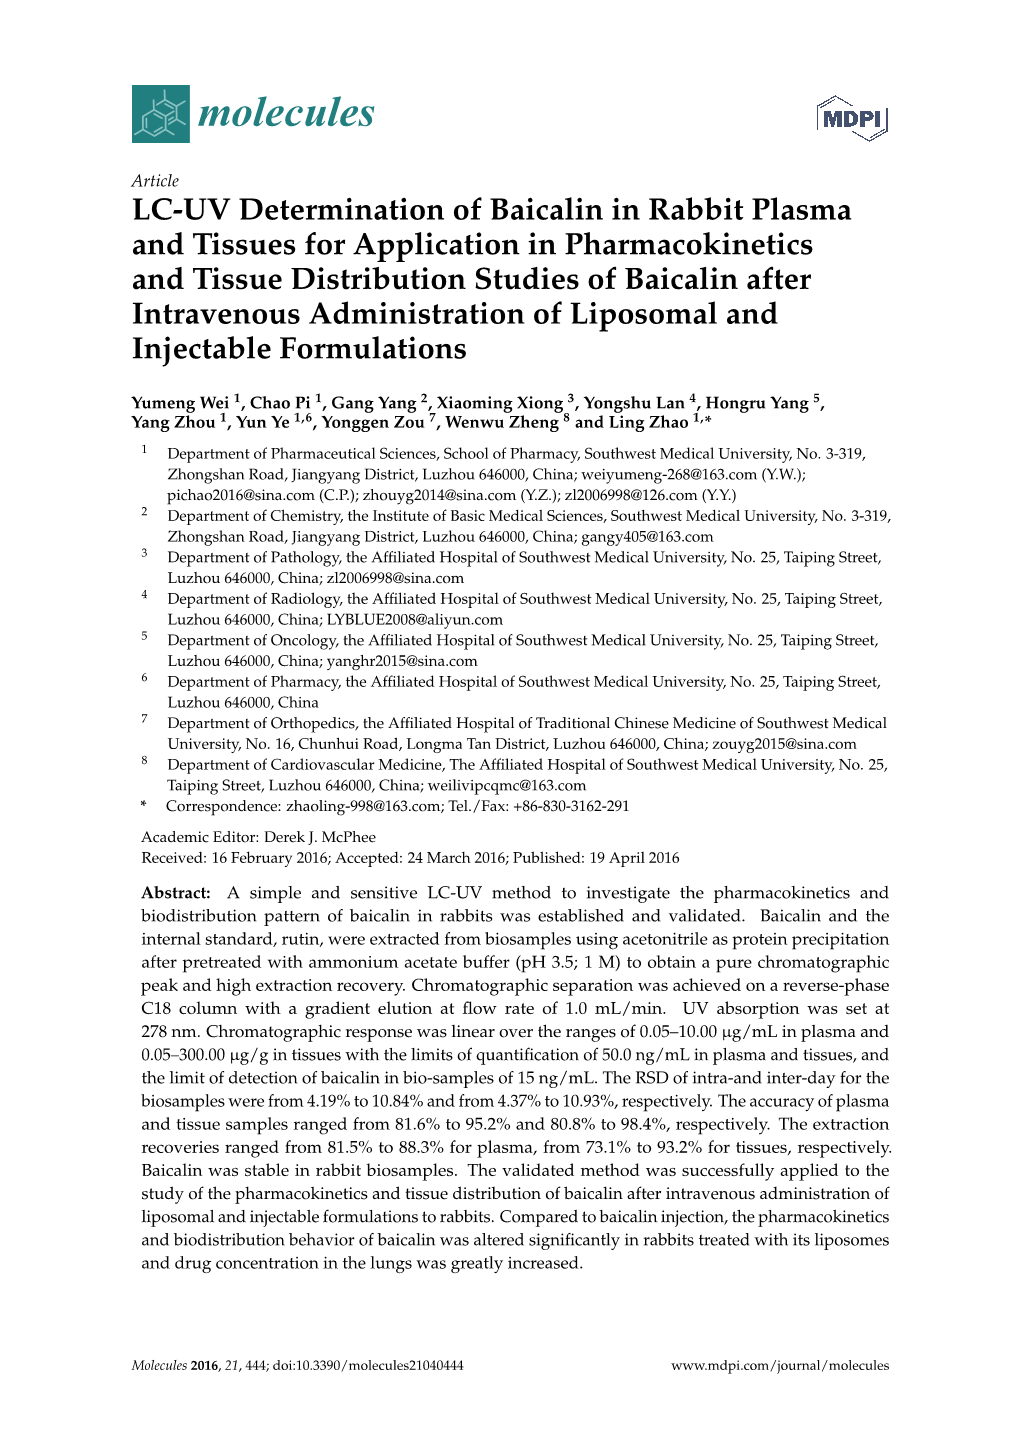 LC-UV Determination of Baicalin in Rabbit Plasma and Tissues for Application in Pharmacokinetics and Tissue Distribution Studies